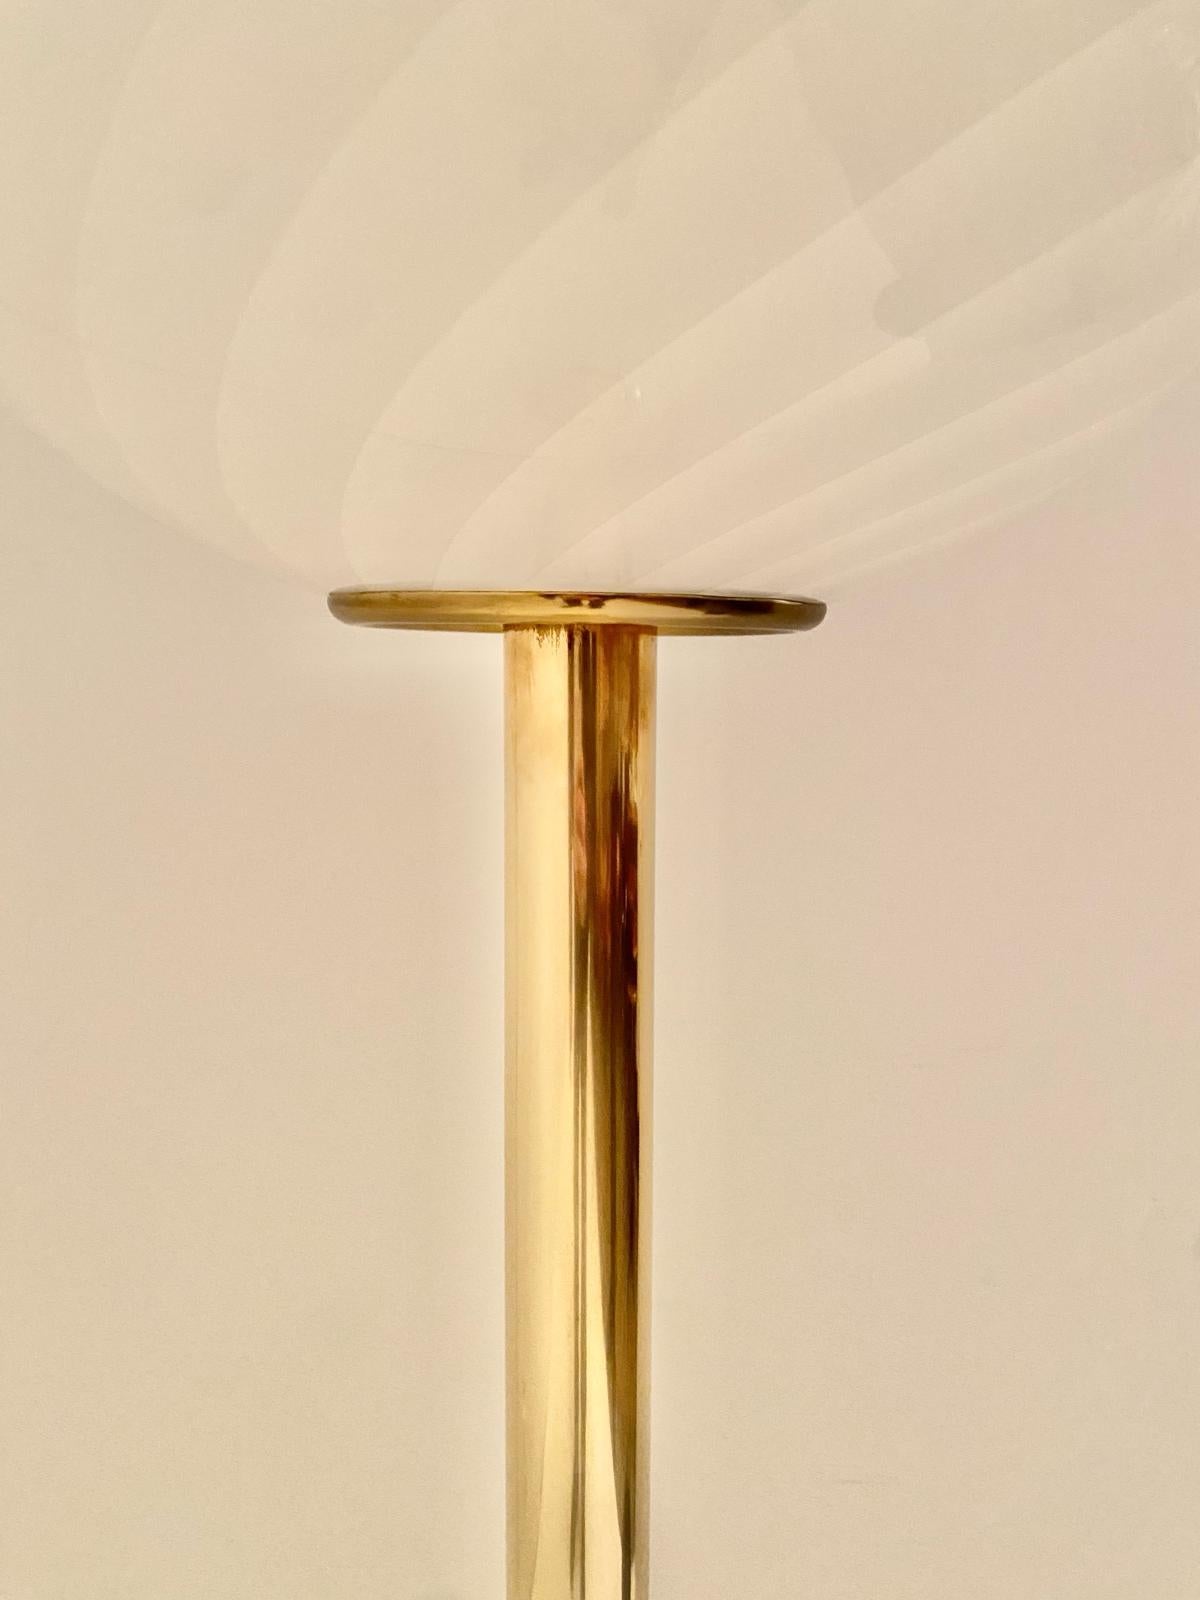 Mid-20th Century Midcentury Modern Brass and  Glass Floor Lamp, Italy 1960s For Sale